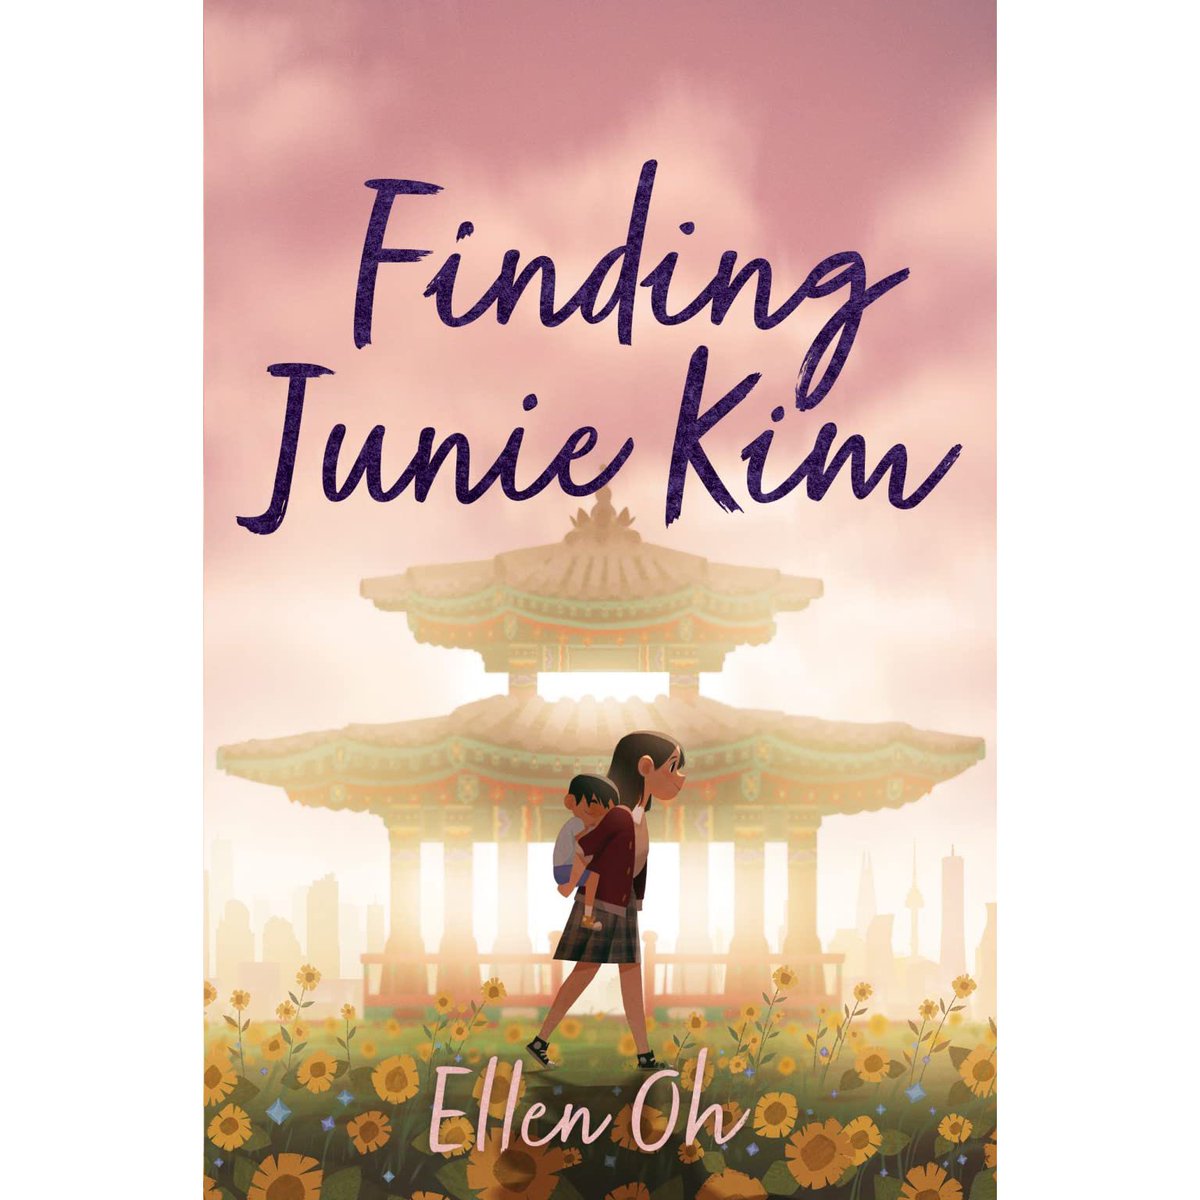 While not necessarily an immigrant story, I read Finding Junie Kim and loved how Ellen Oh wrote her family’s story and honored their history. That’s what I try to do with my books and it’s even more important to me now that my dad is gone. (6/6)Junie:  https://www.indiebound.org/book/9780062987983